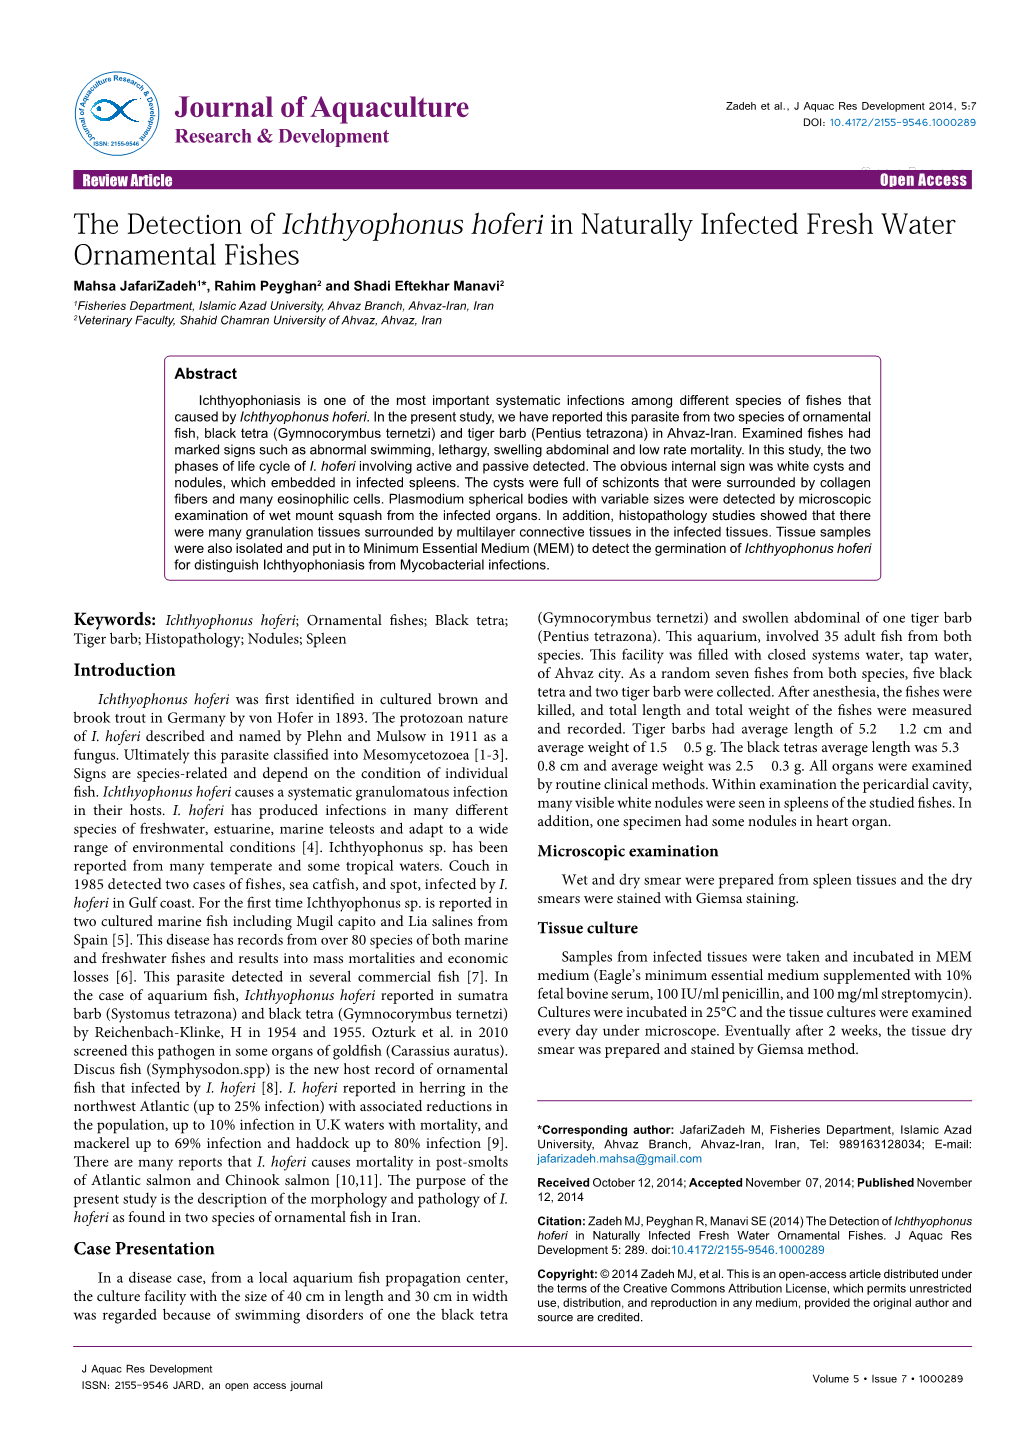 The Detection of Ichthyophonus Hoferi in Naturally Infected Fresh Water